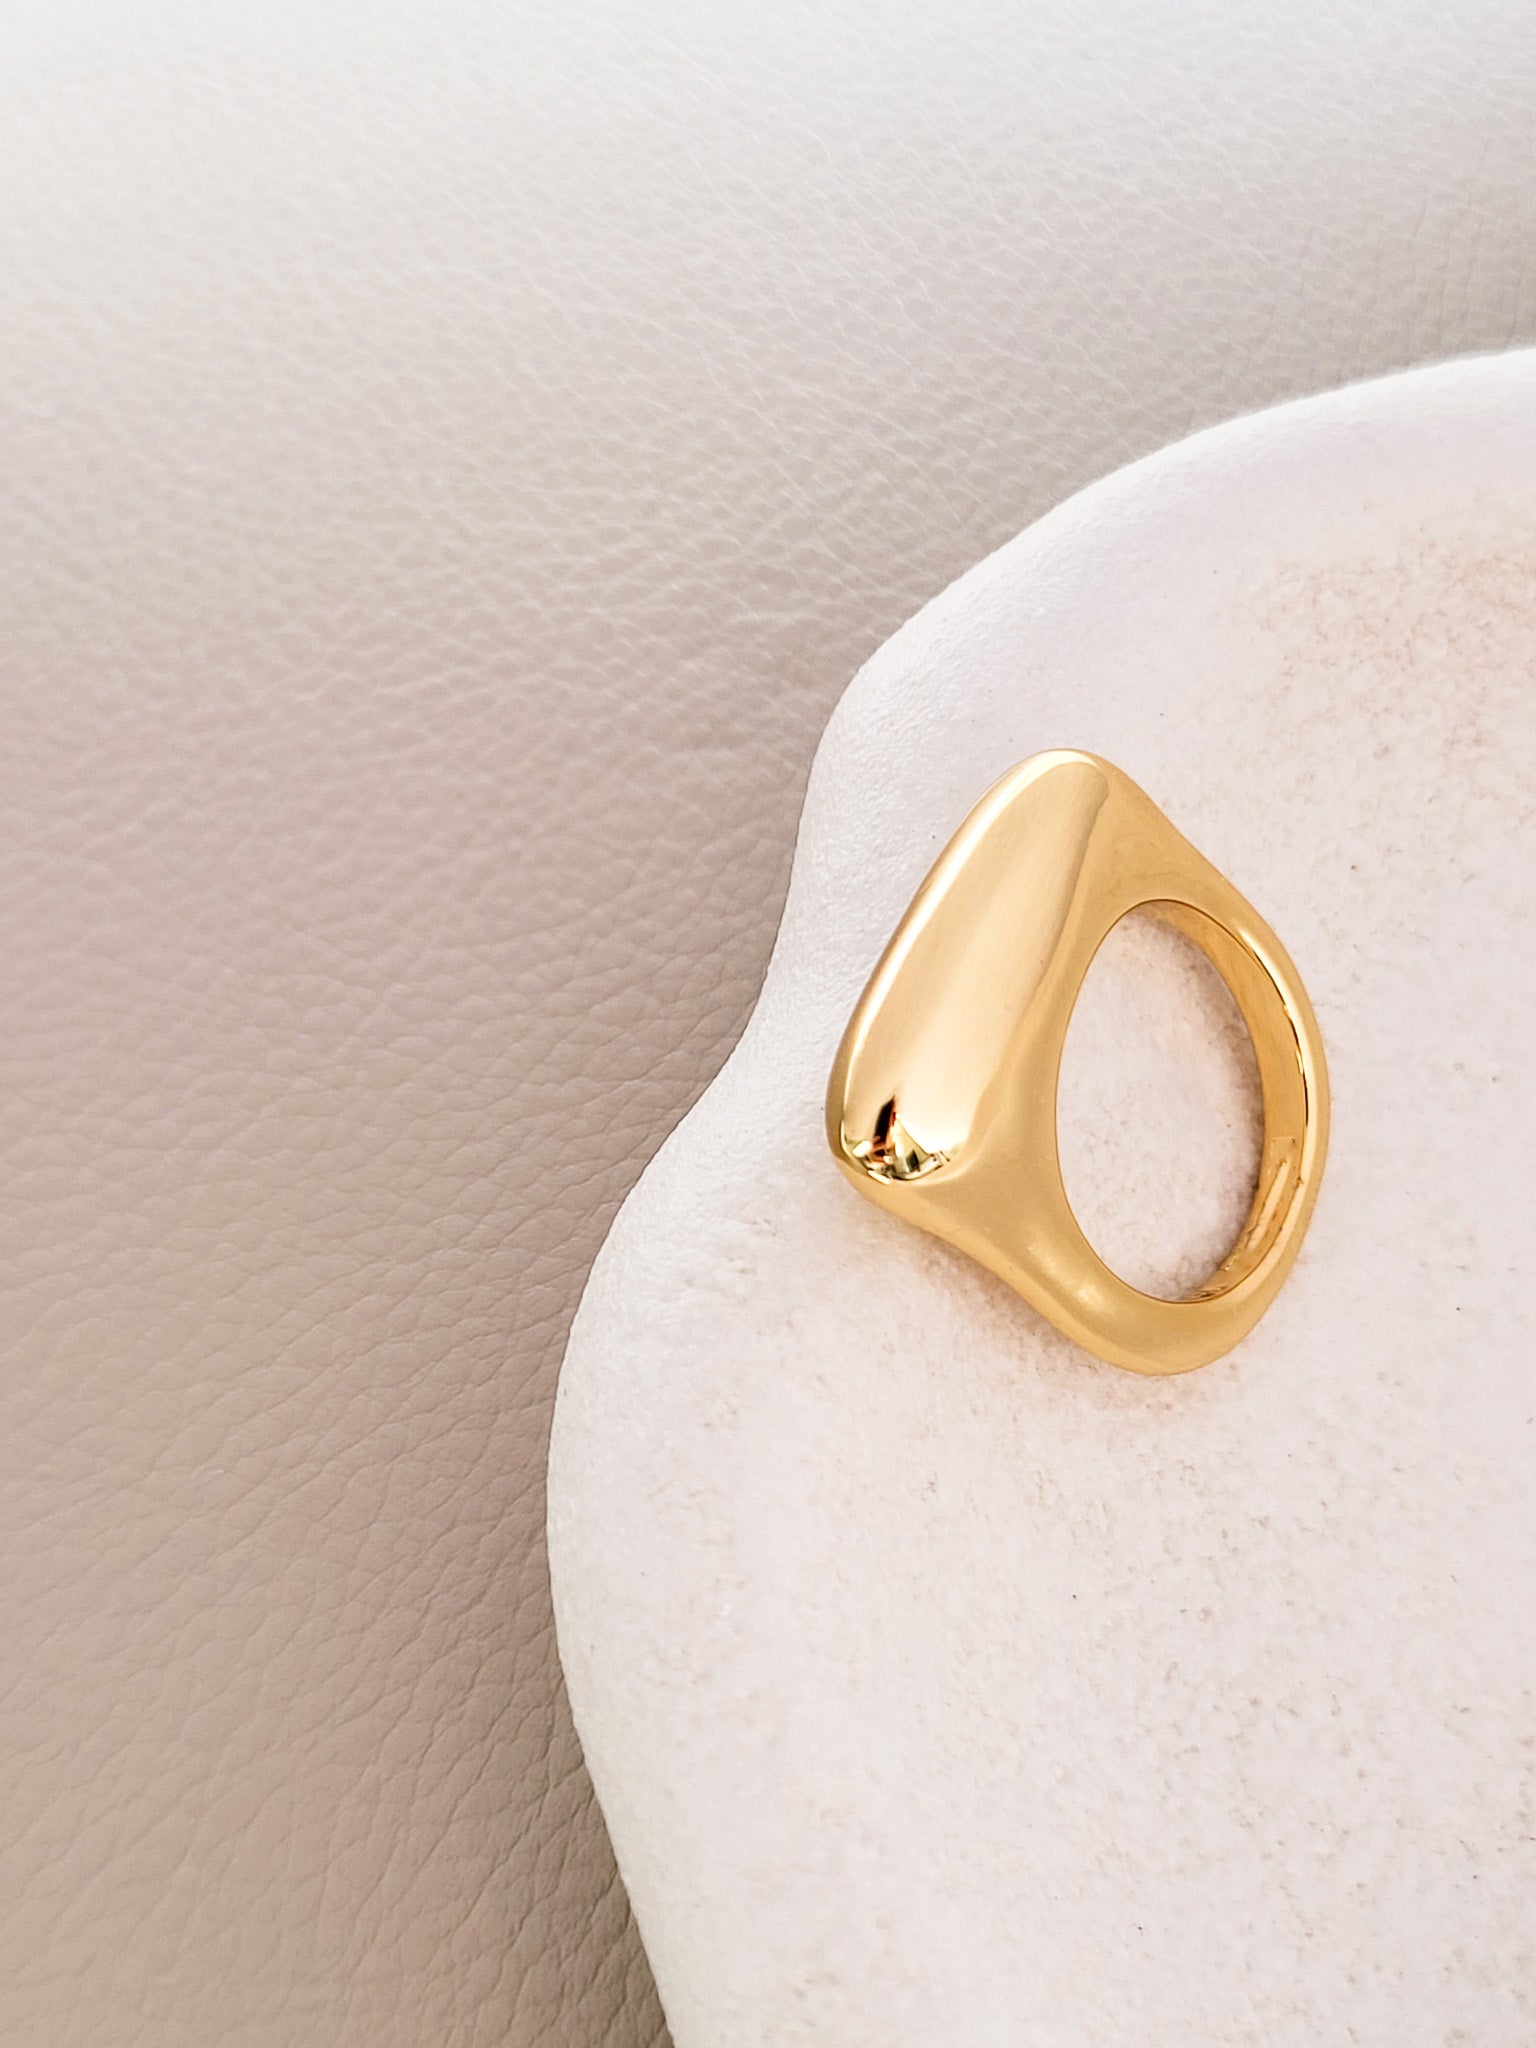 Gold oval ring